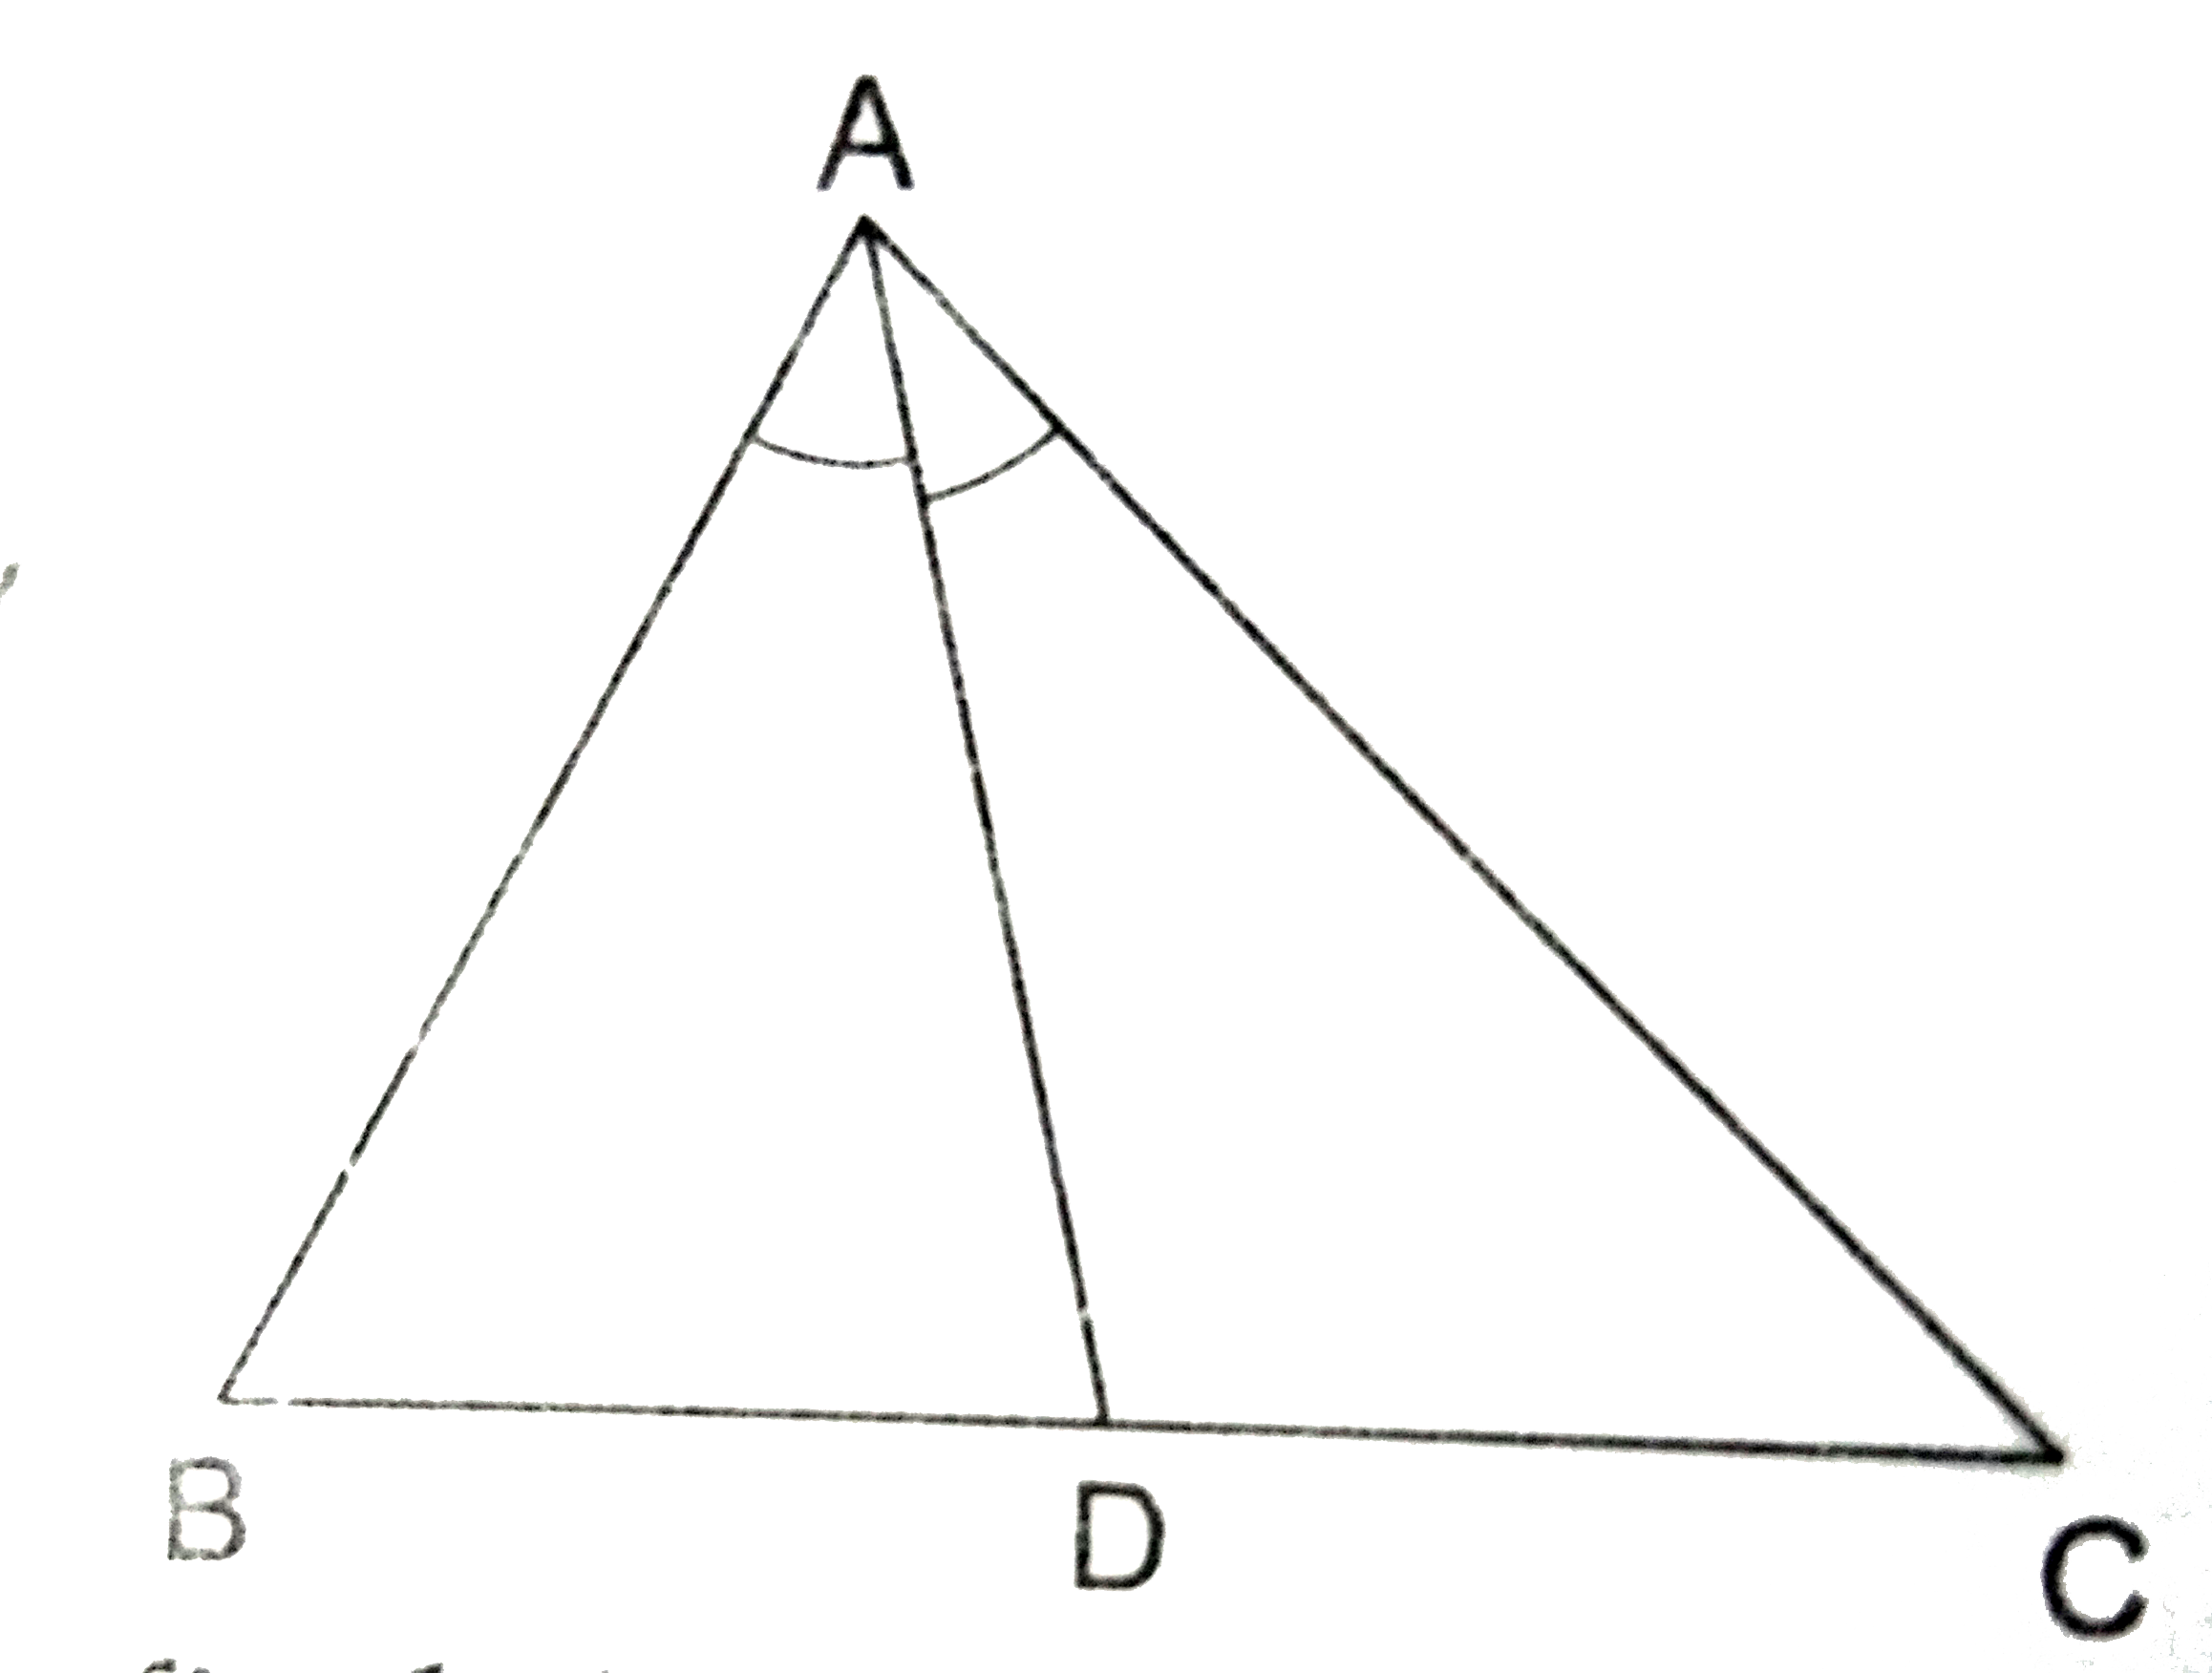 In a Delta ABC,  AD is the bisector of angle A.    (i) If AB=6.4 cm, AC=8 cm and BD=5.6 cm, find DC.   (ii) If AB=10 cm, AC=14 cm and BC=6 cm, find BD and DC.    (iii) If AB=5.6 cm, BD=3.2 cm, and BC=6 cm, find AC.   (iv) If AB=5.6 cm, AC=4 cm, and DC 3 cm, find BC.